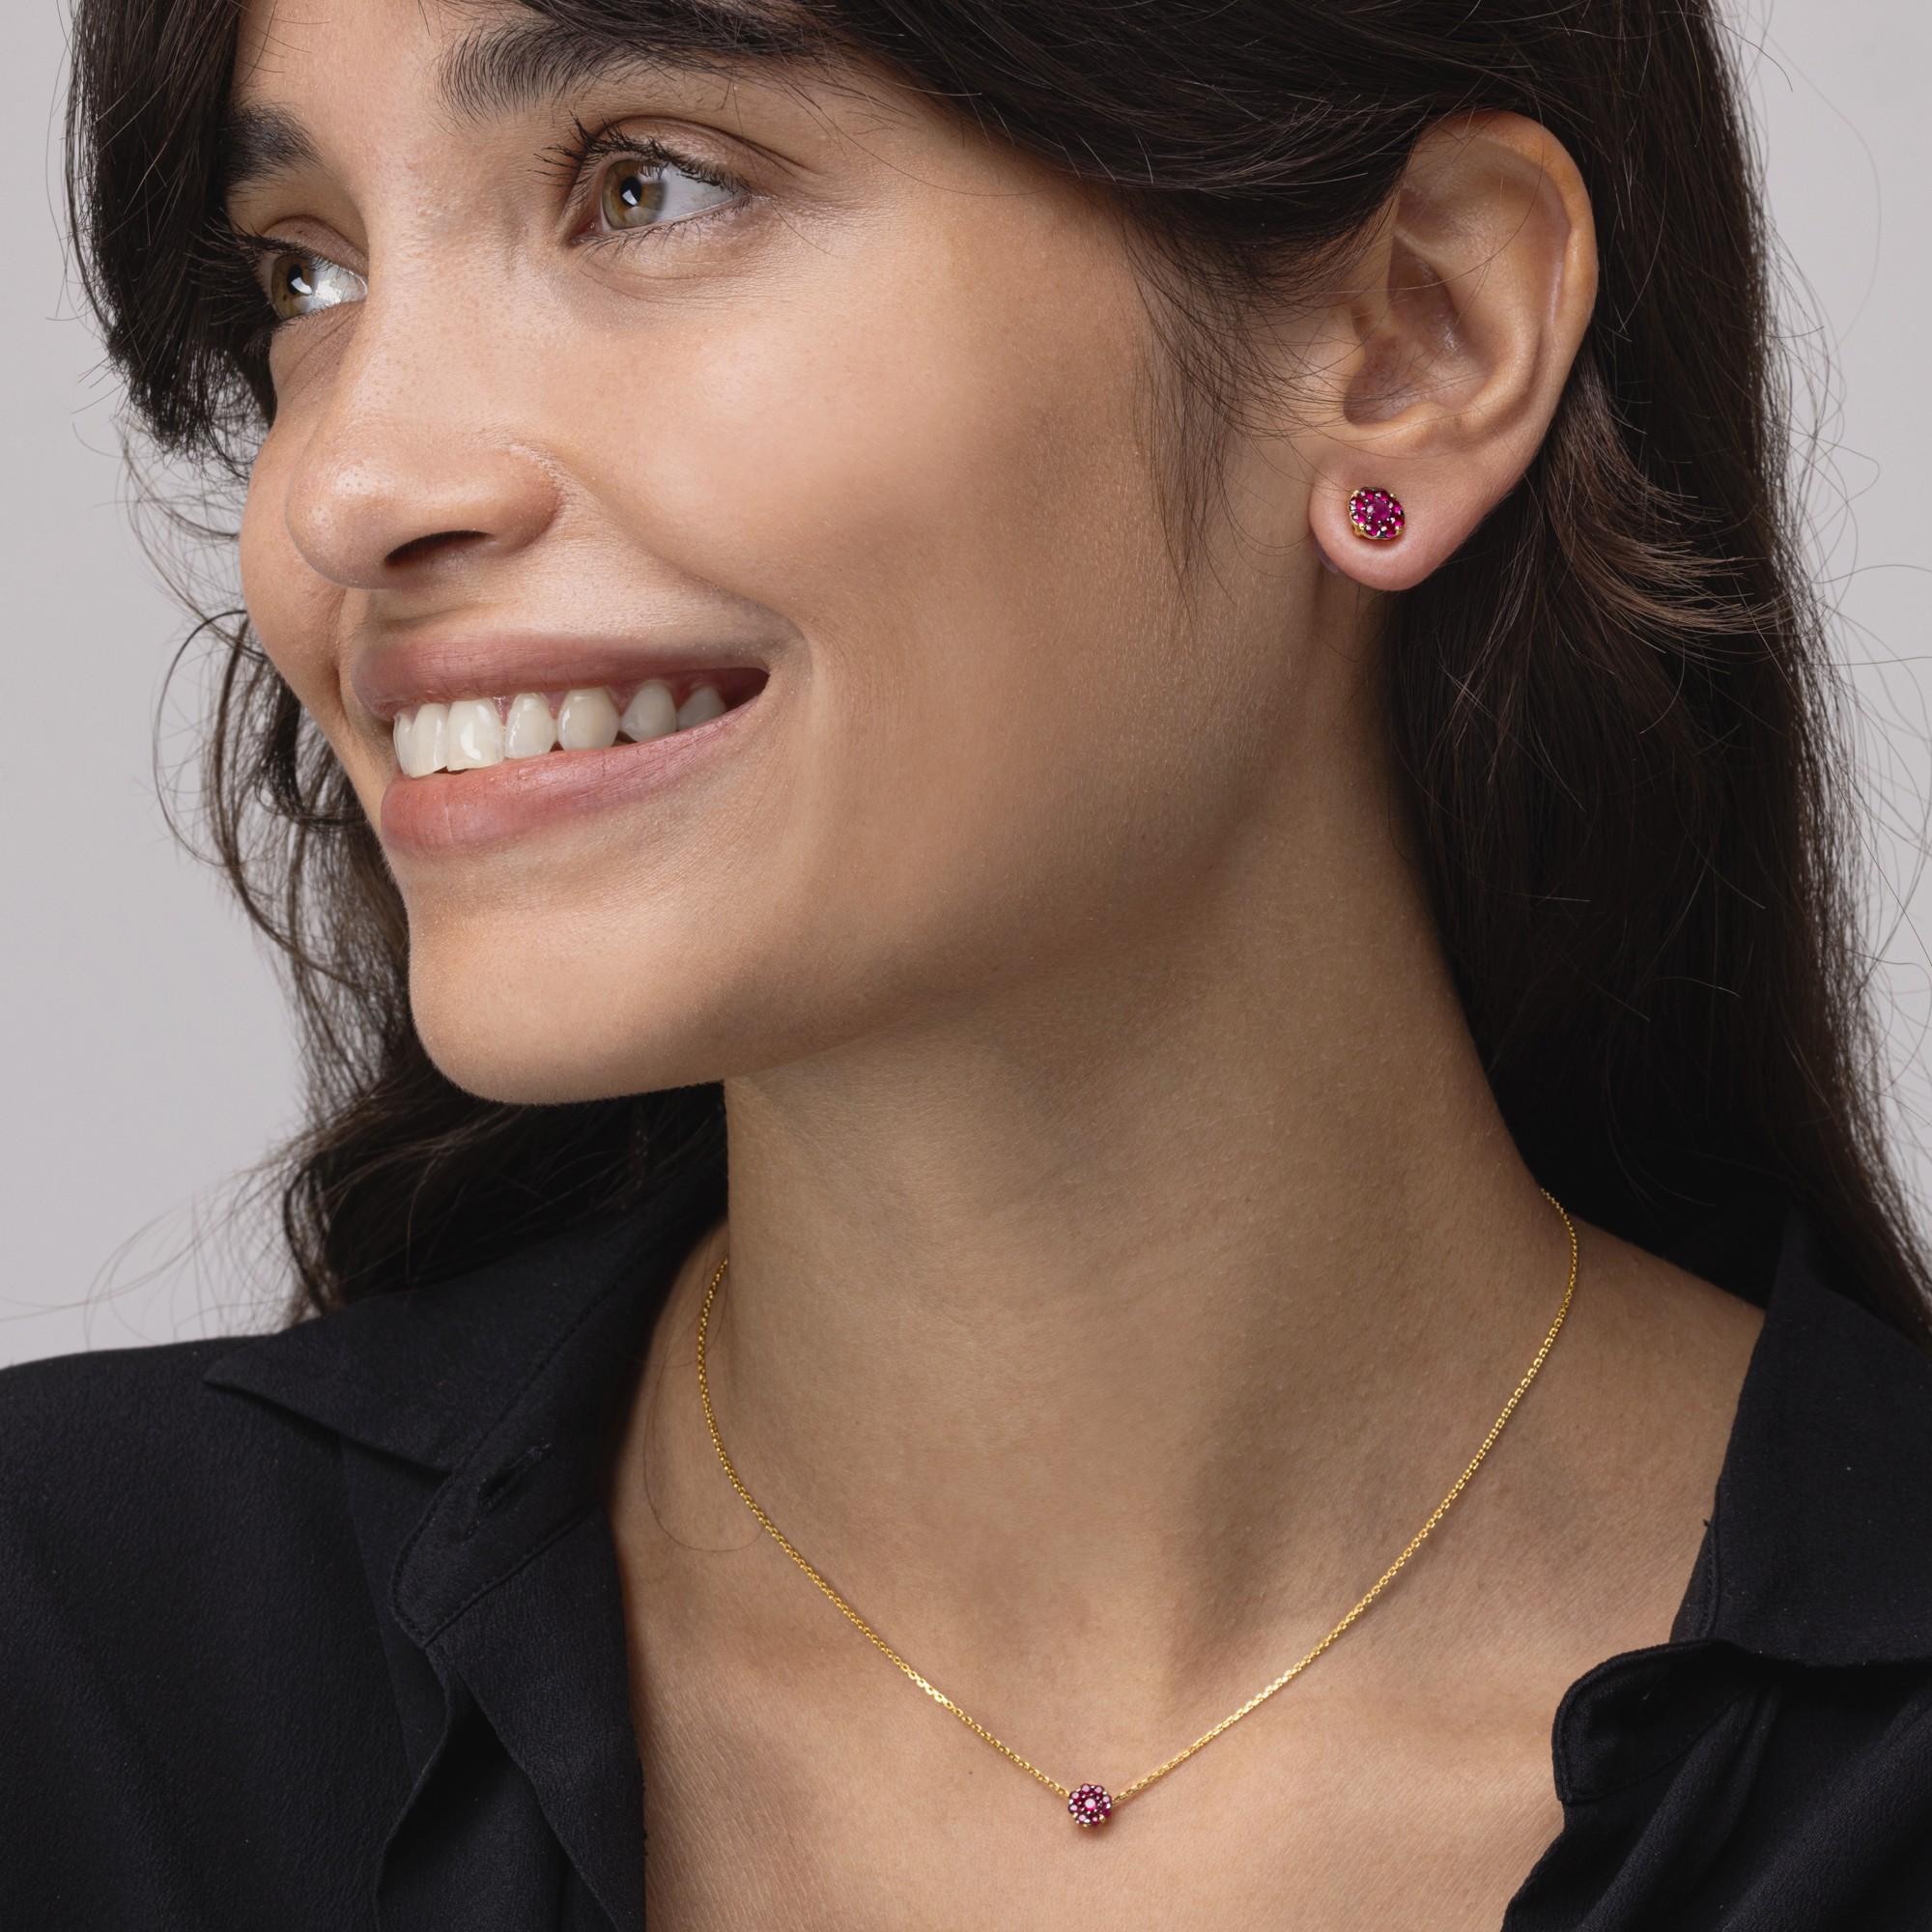 Alex Jona design collection, hand crafted in Italy, 18 Karat yellow gold chain necklace suspending a round pendant  set with 0.30 carats of round cut natural rubies.

Alex Jona jewels stand out, not only for their special design and for the